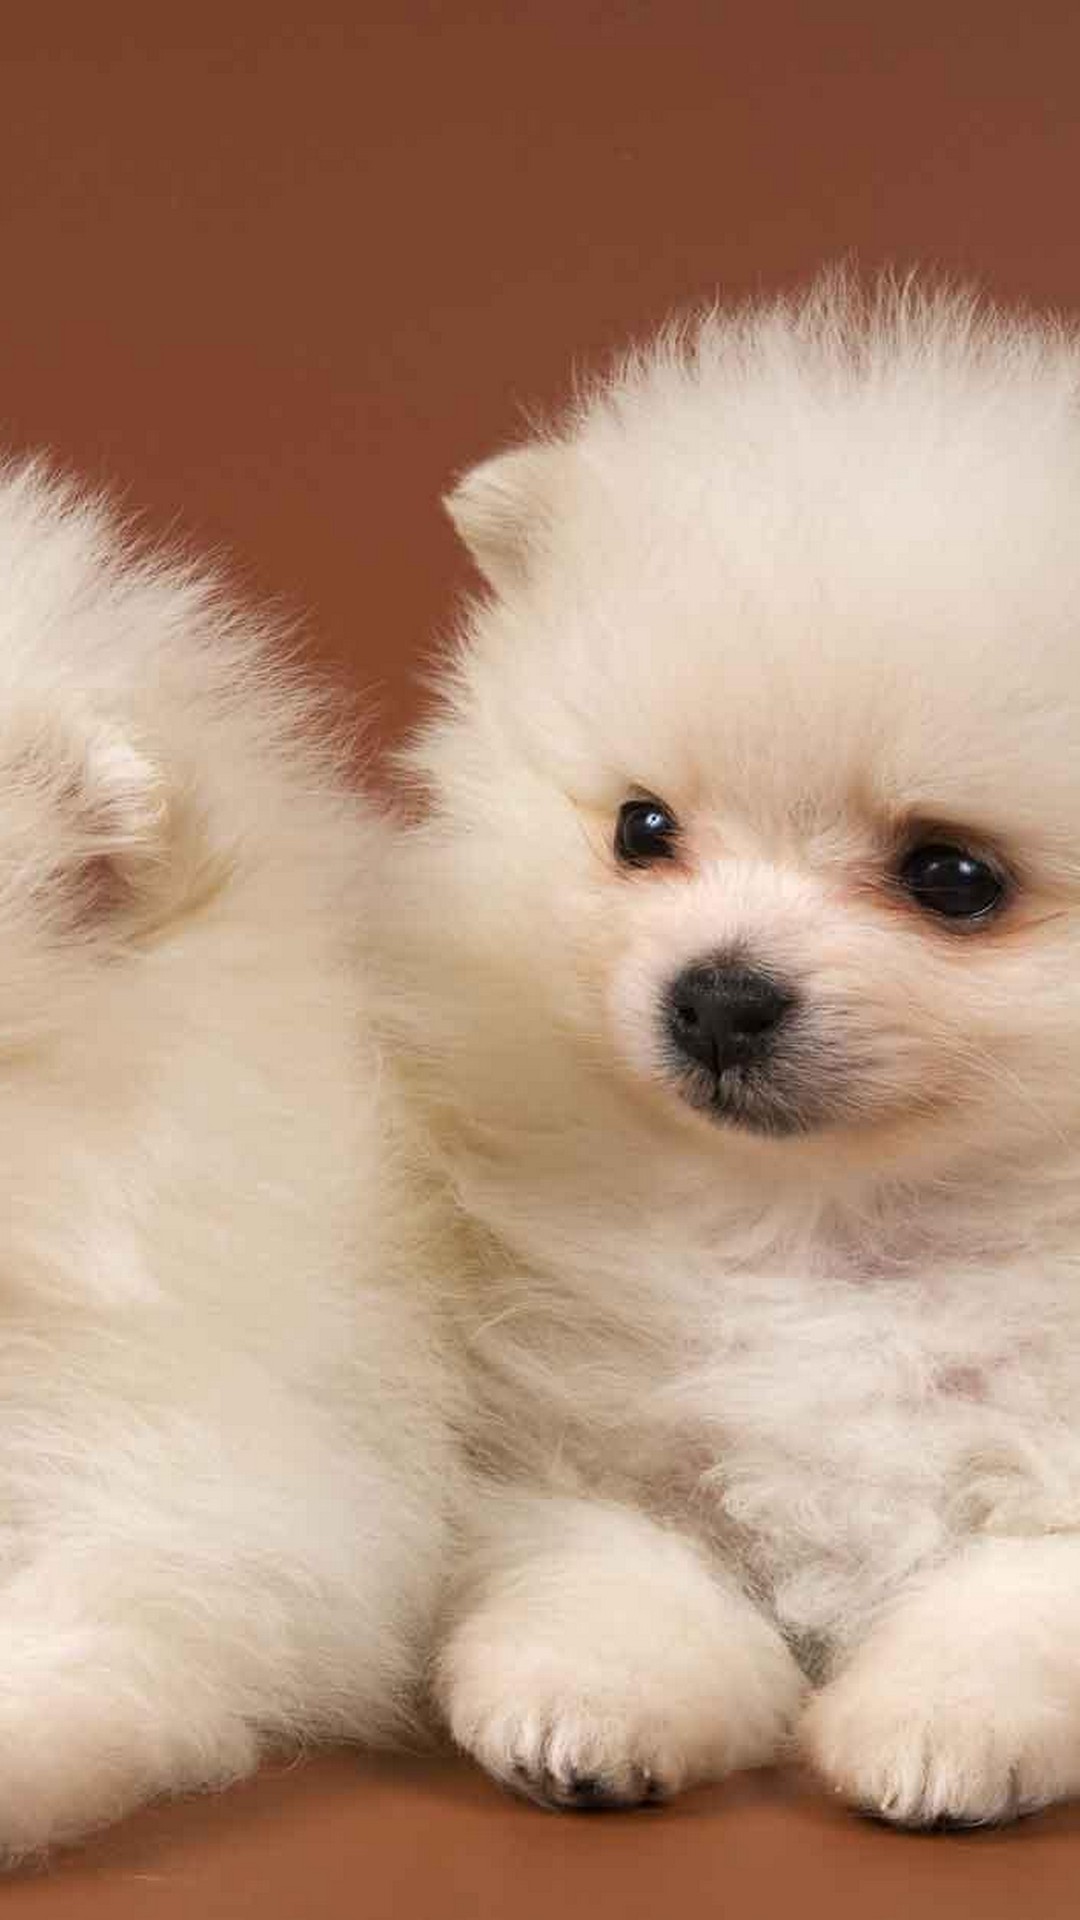 Puppy HD Wallpapers For Android with HD resolution 1080x1920